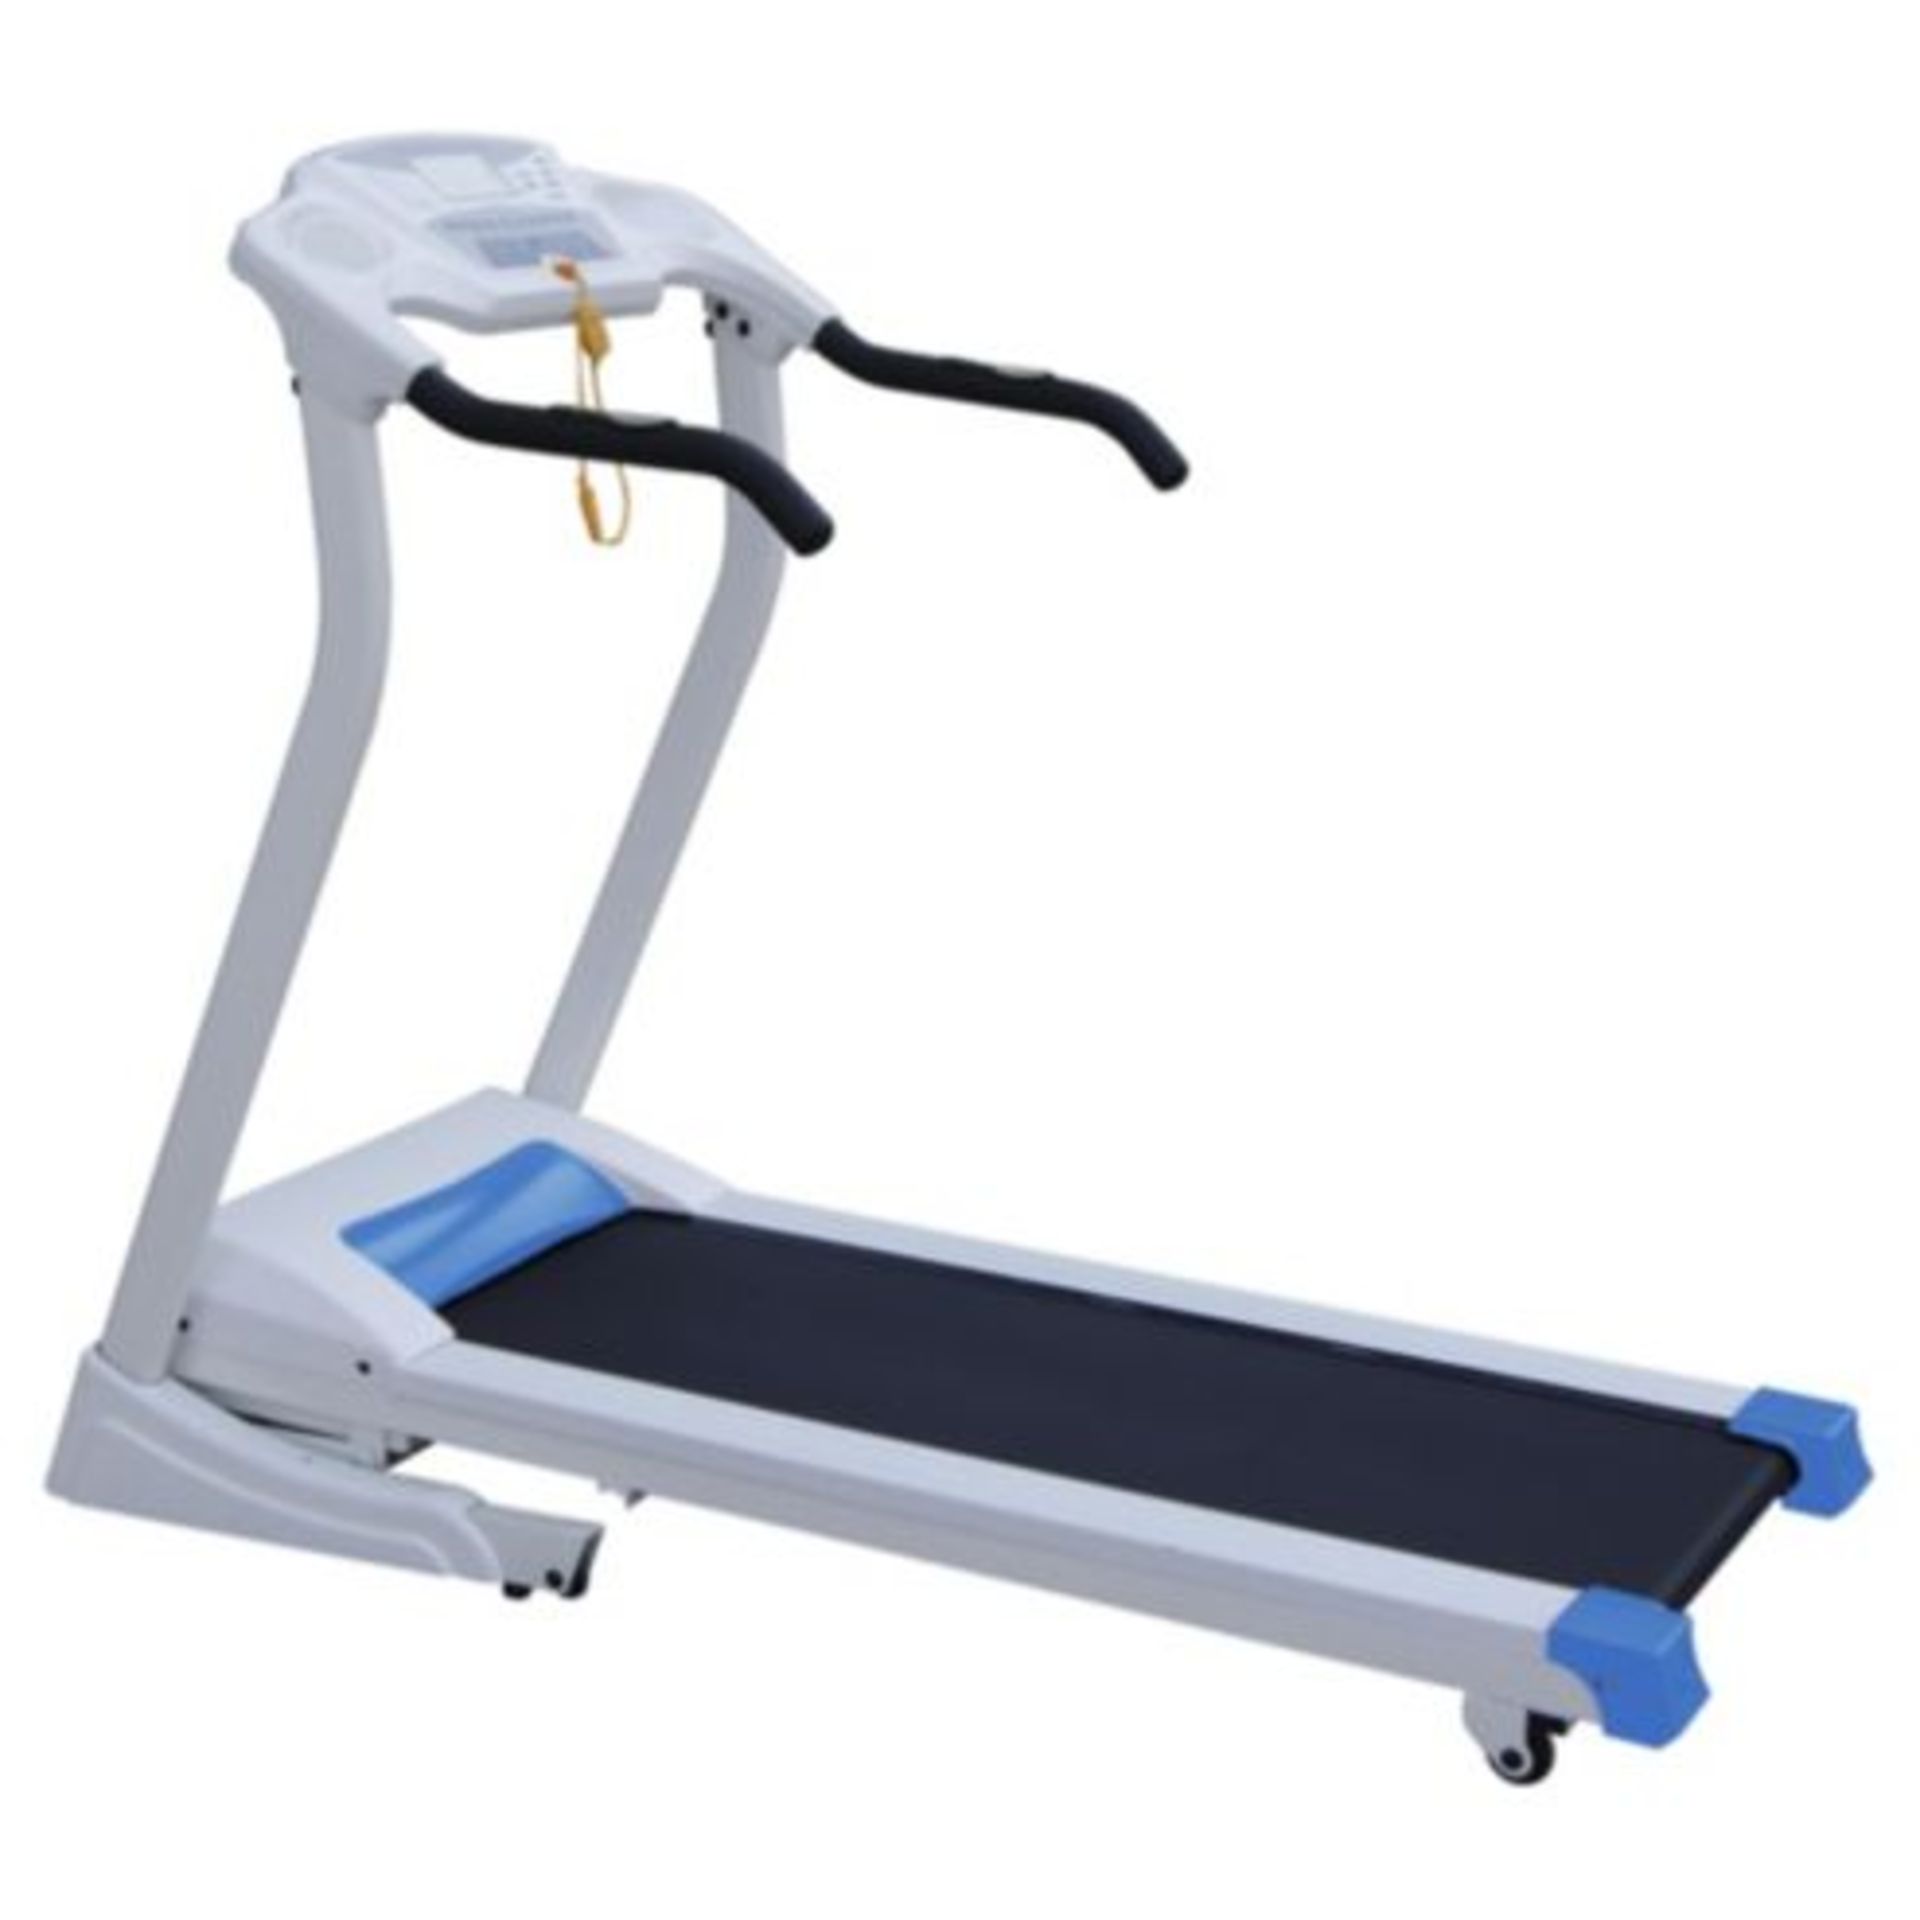 V Brand New Motorised Treadmill with 1.5hp Motor - Shock Absorbing Deck - LCD Monitor Displaying - Image 2 of 3